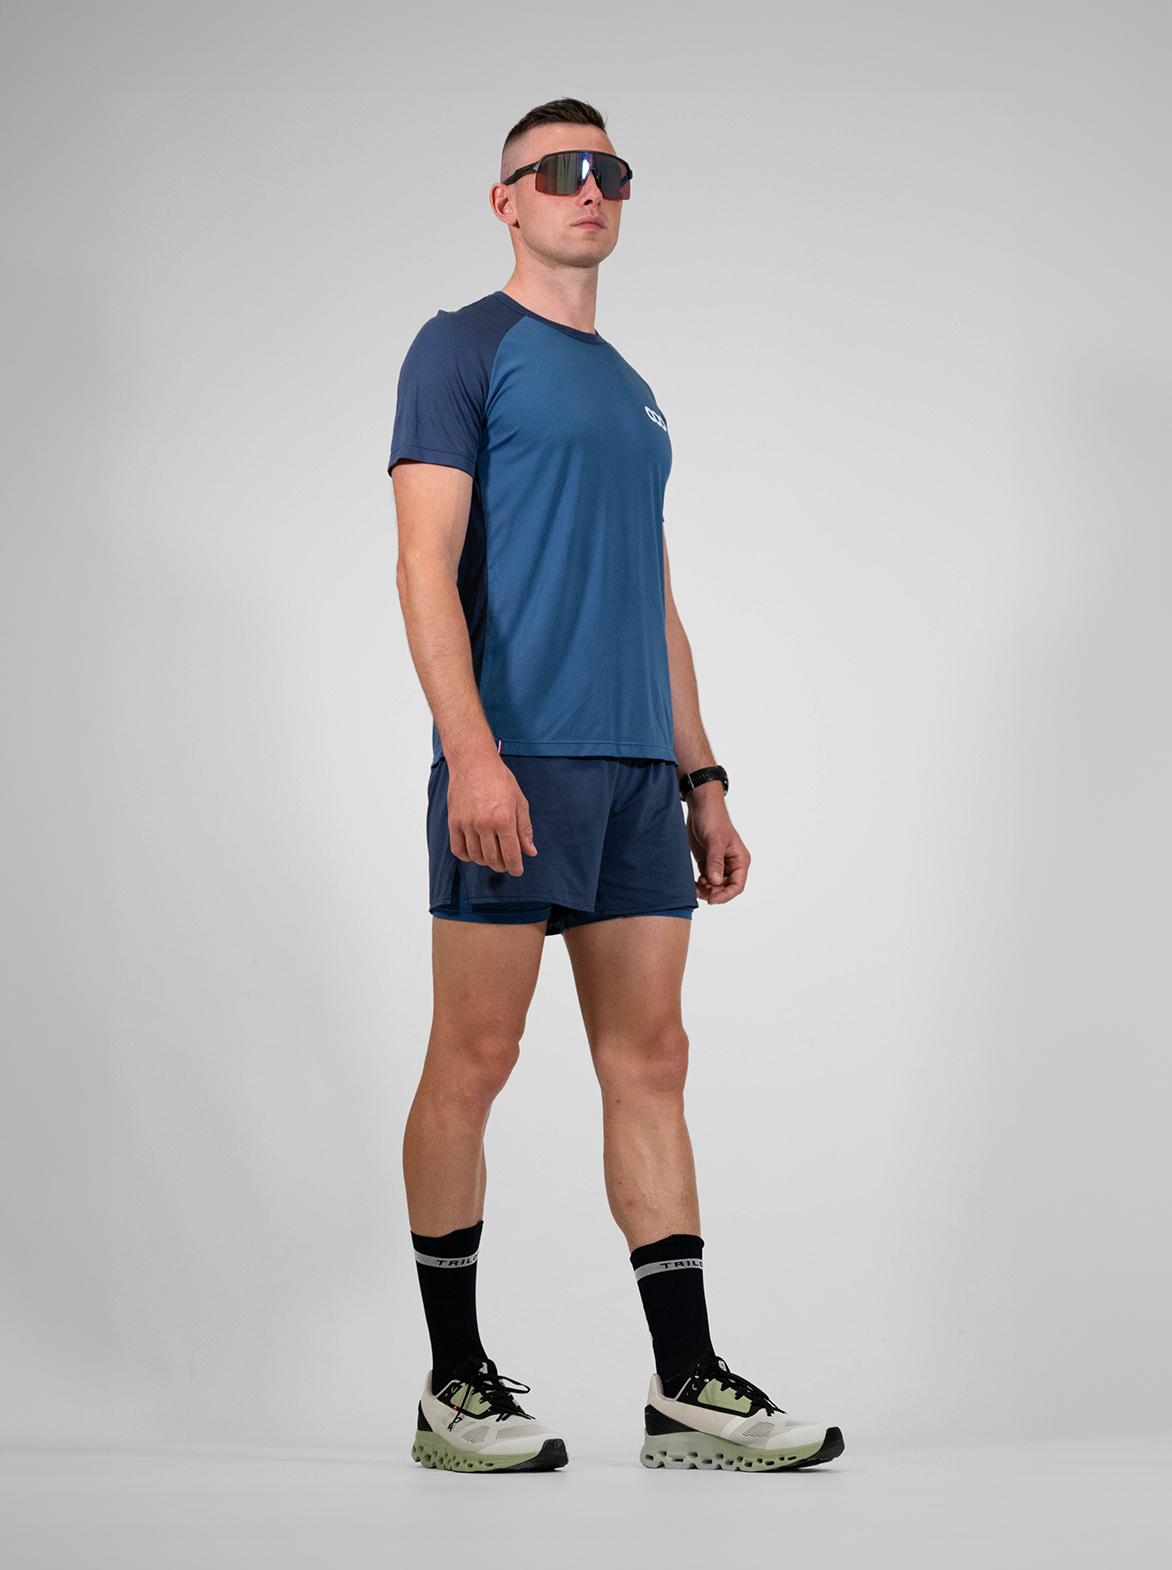 T-Shirt Running Homme Made in France et Recyclé — TOULON